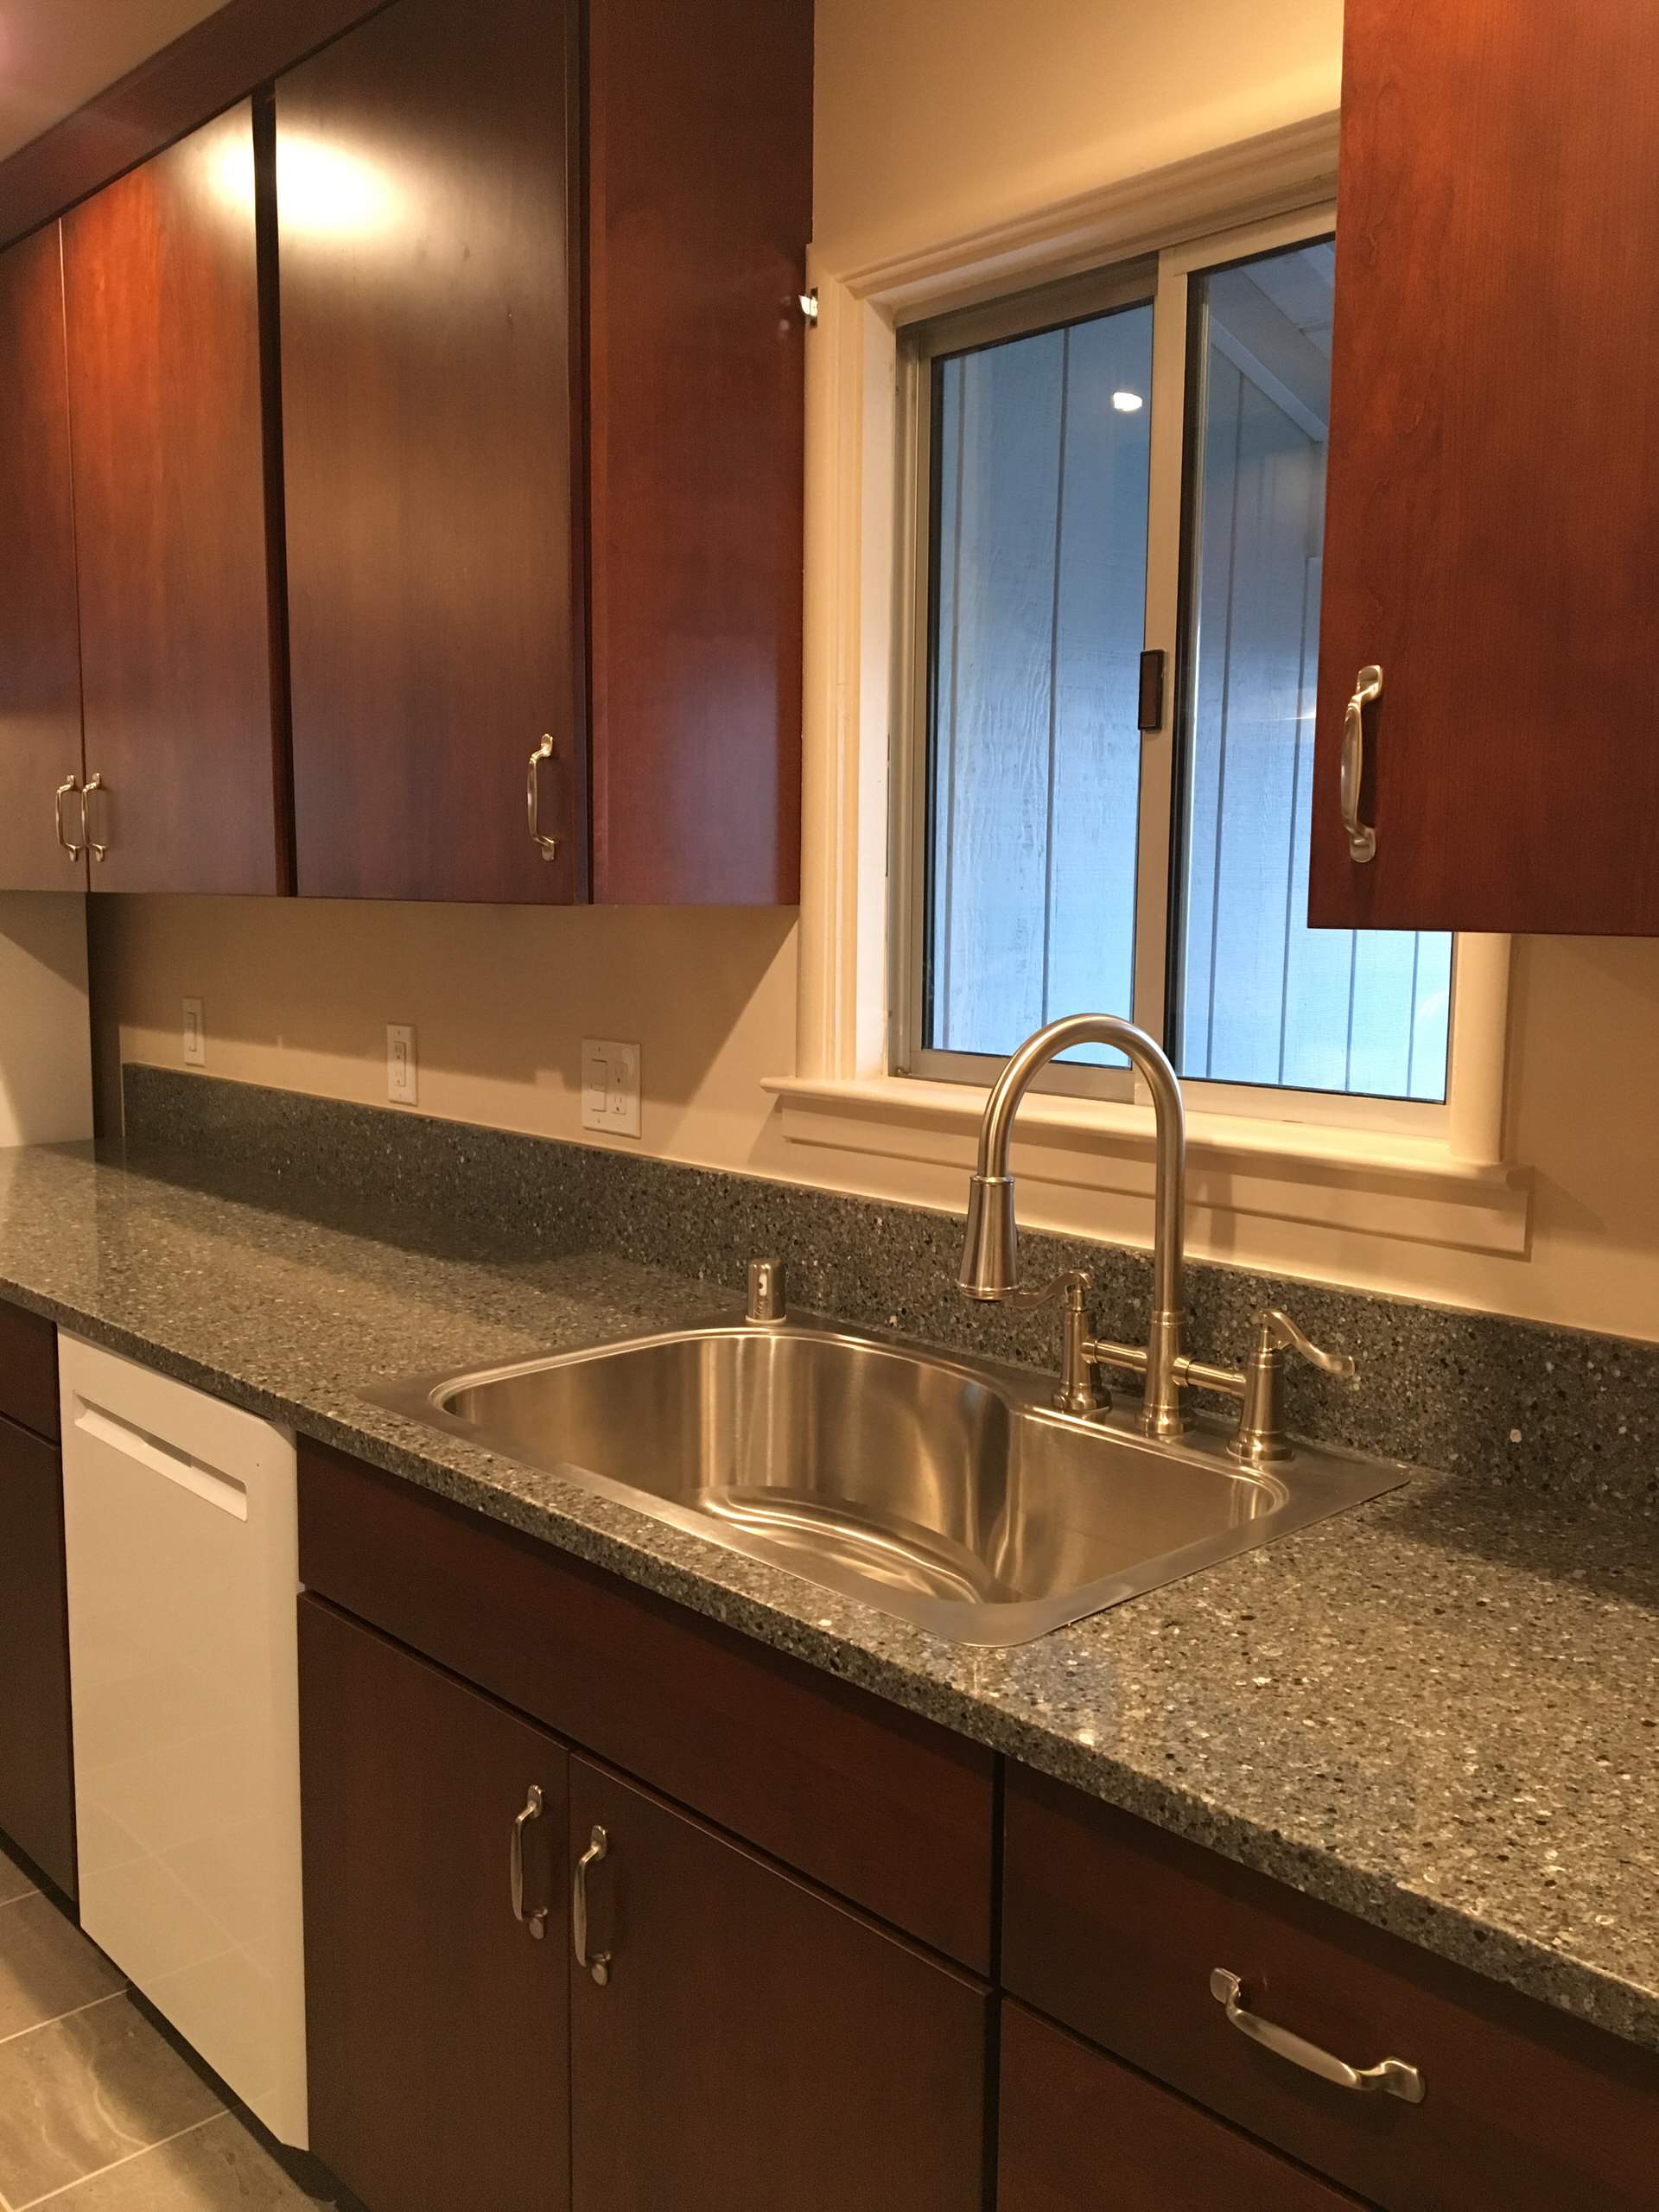 Drop-in Stainless Steel Sink w/Retro Style Set-on Faucet.